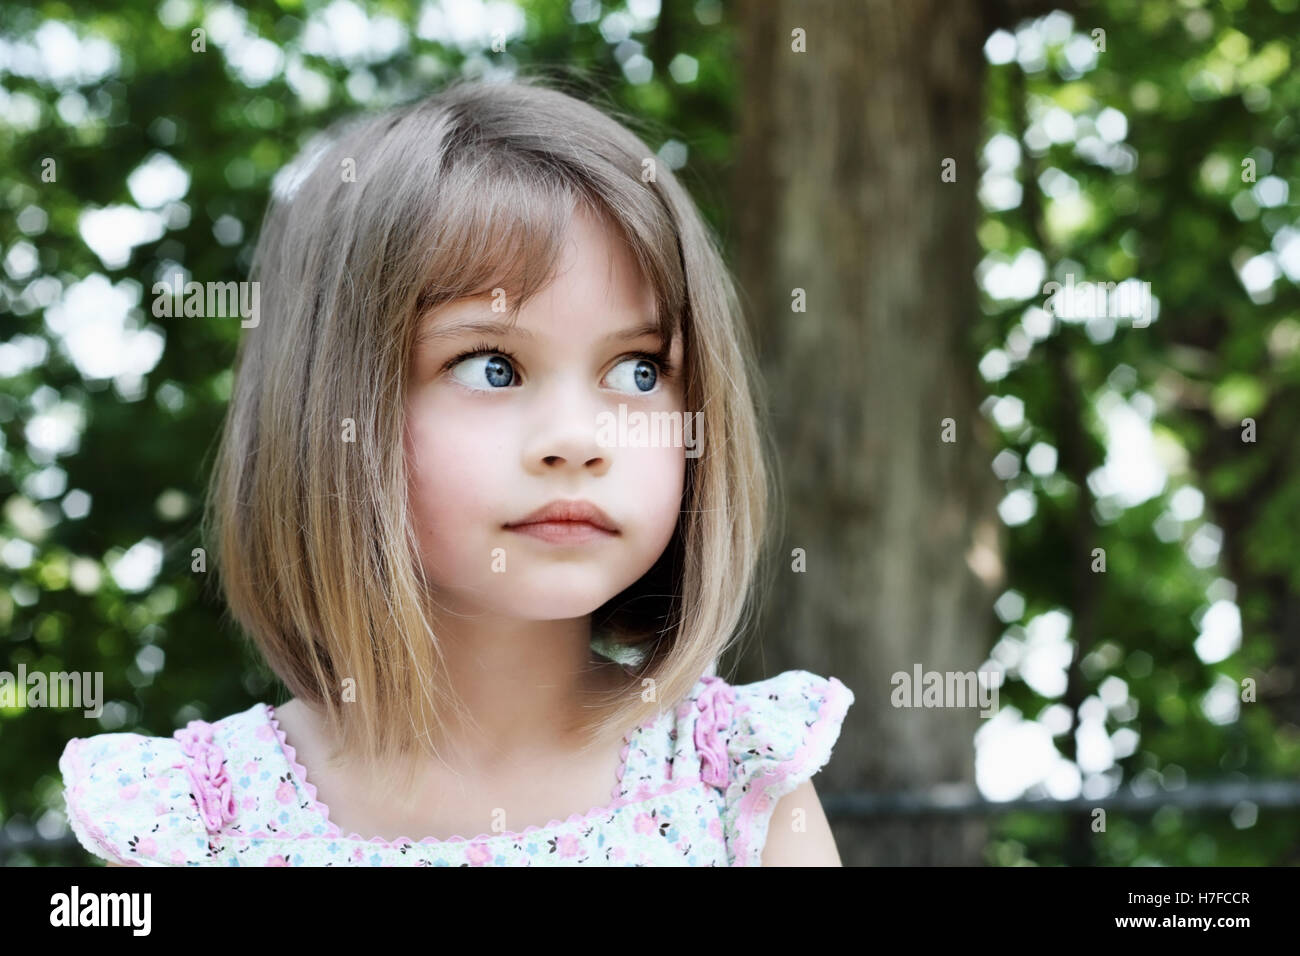 Cute little girl with bobbed hair cut looking away from camera. Extreme shallow depth of field. Stock Photo